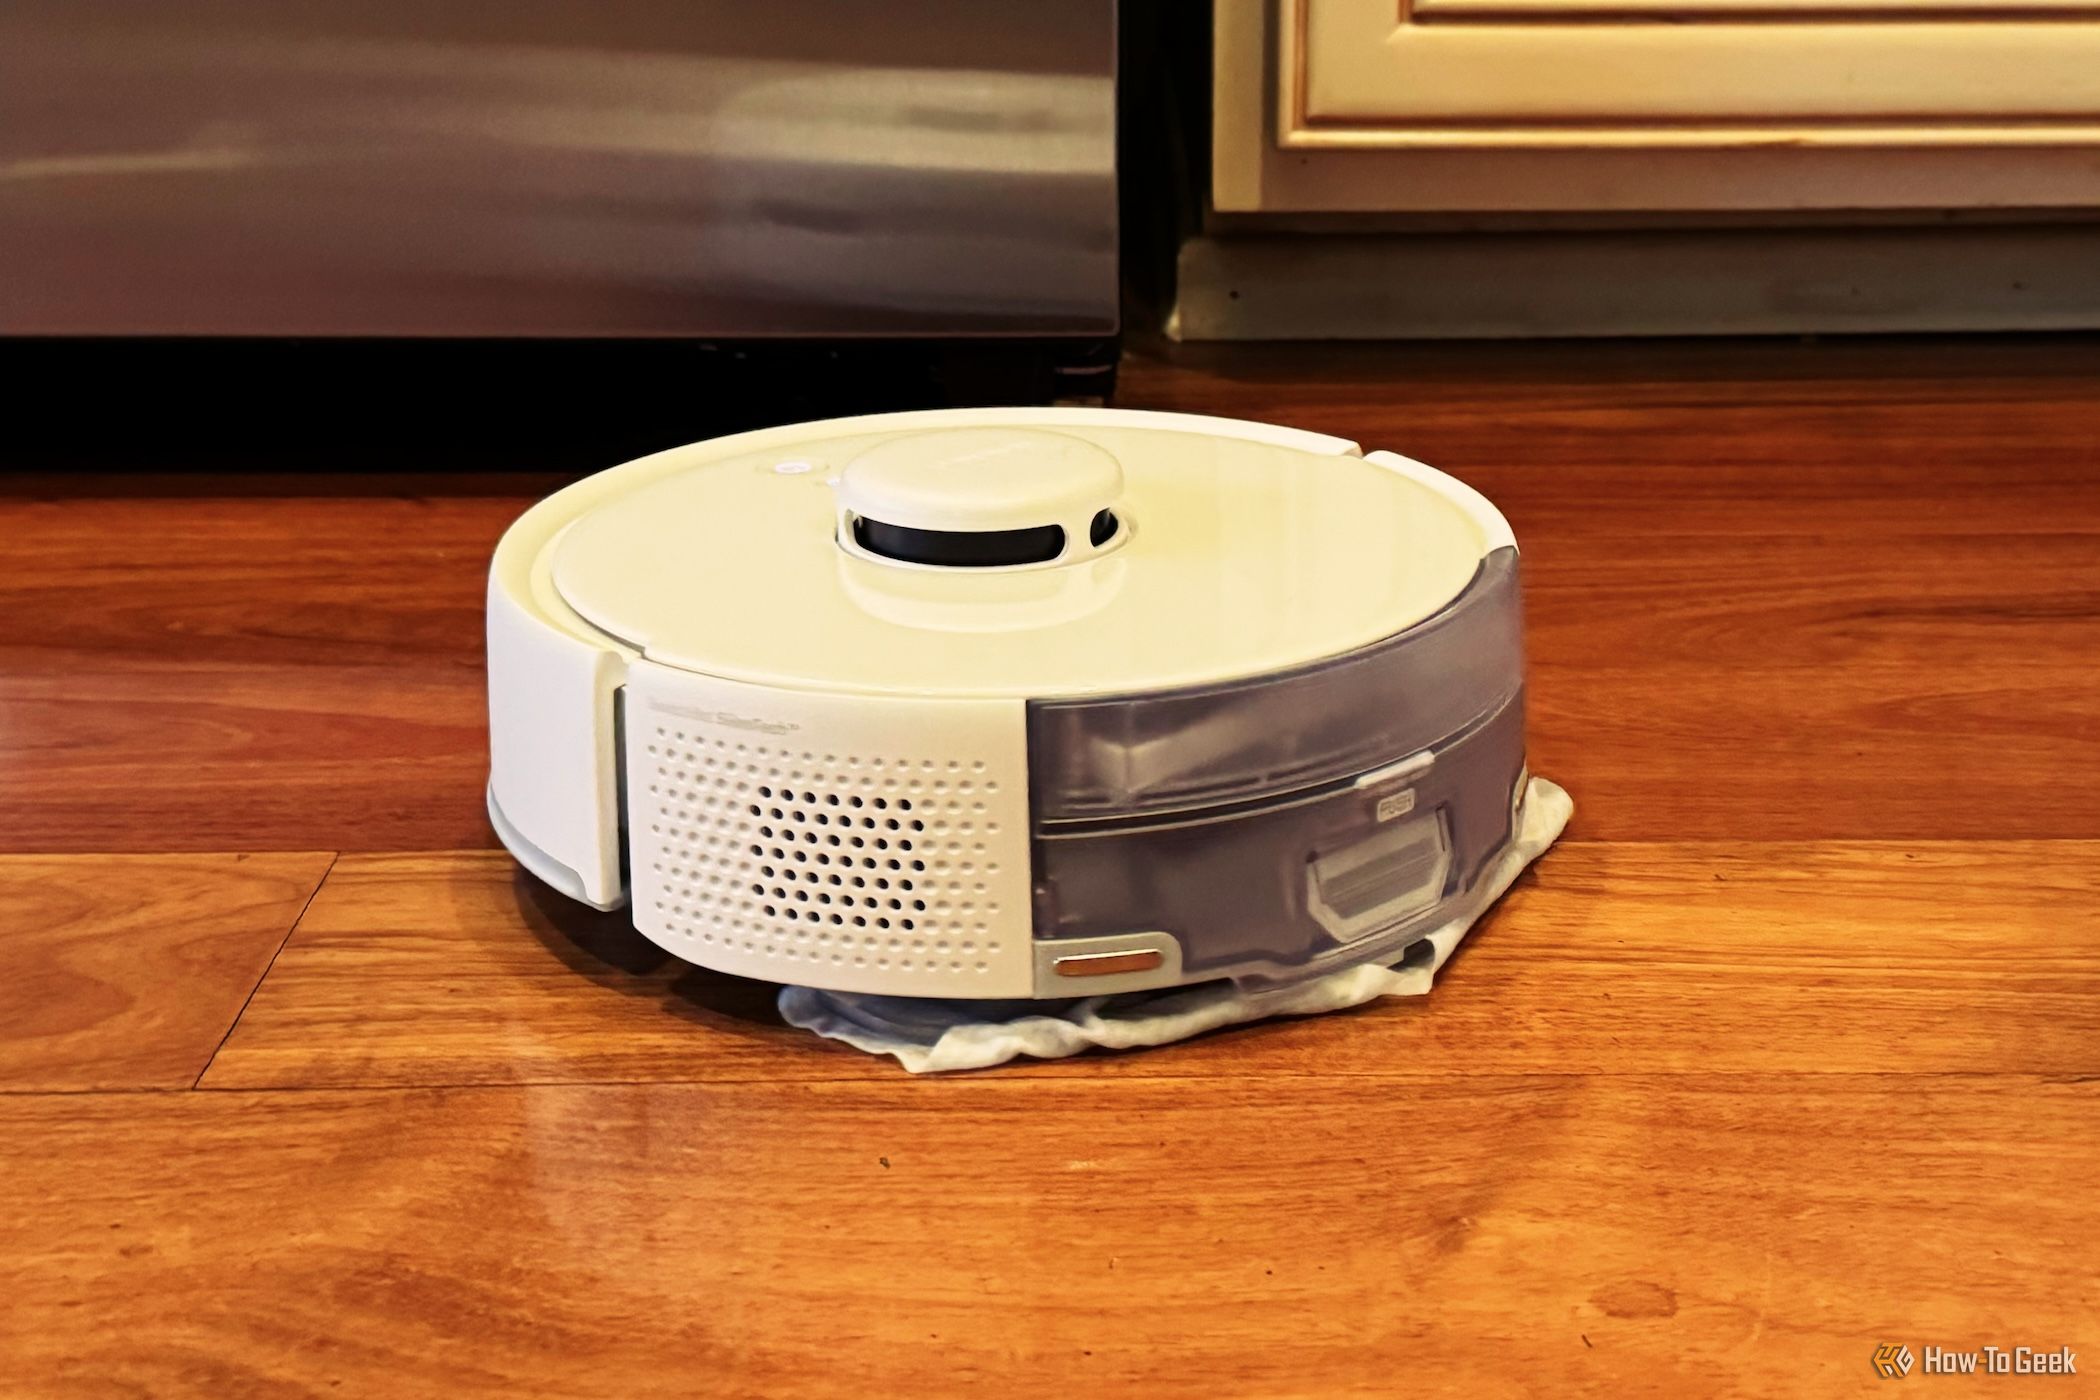 SwitchBot Mini K10+ Review: A Cute Robot Vacuum Made For Small Spaces